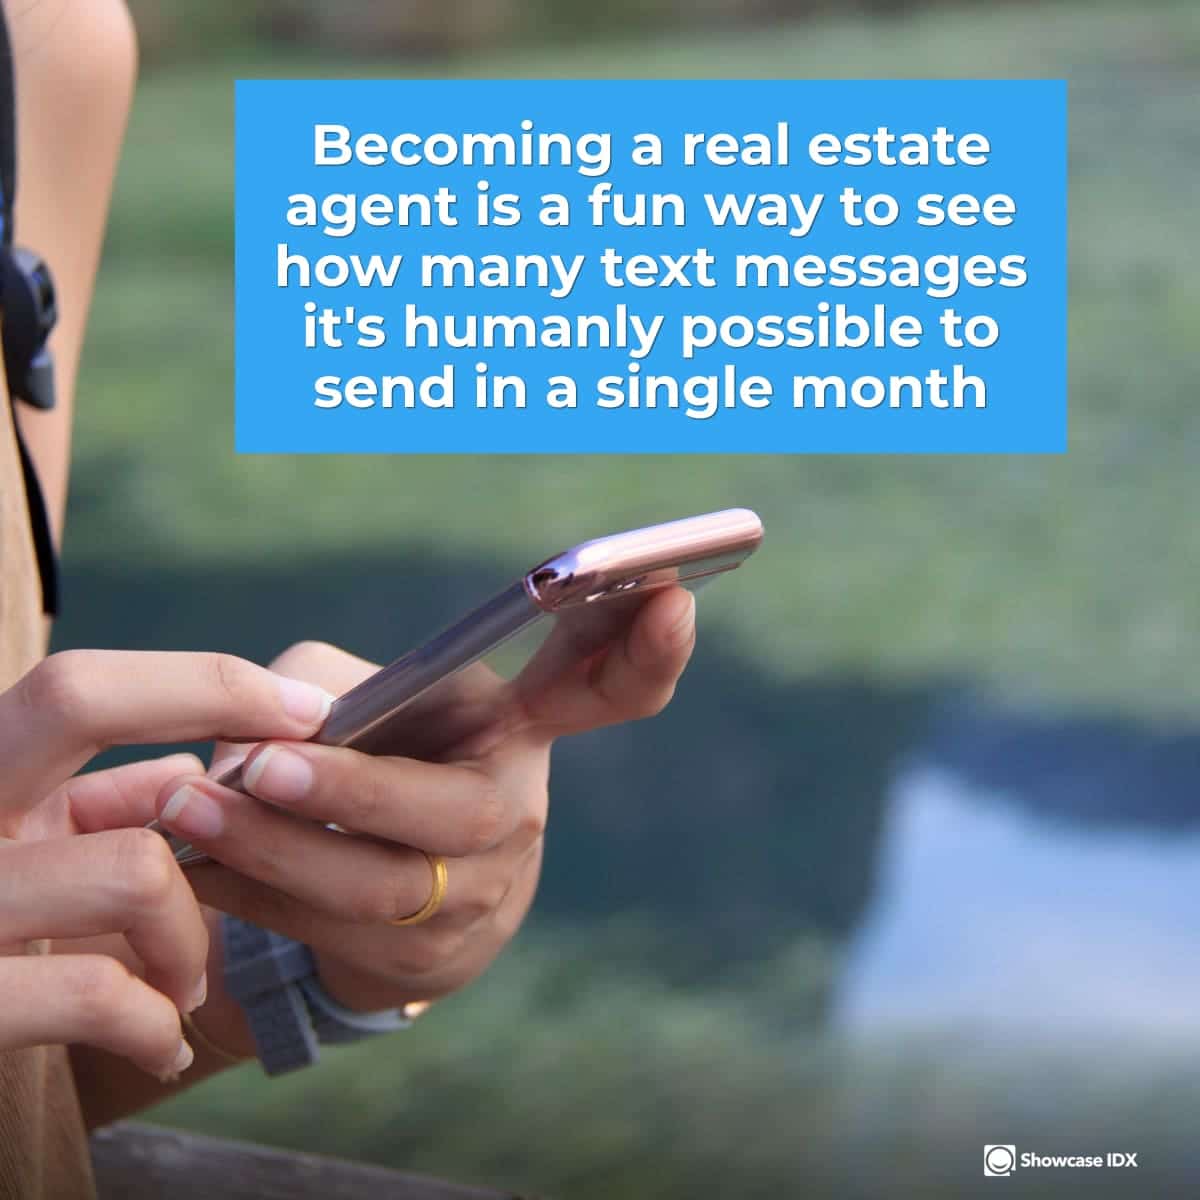 Becoming a real estate agent is a fun way to see how many text messages it's humanly possible to send in a single month. - funny